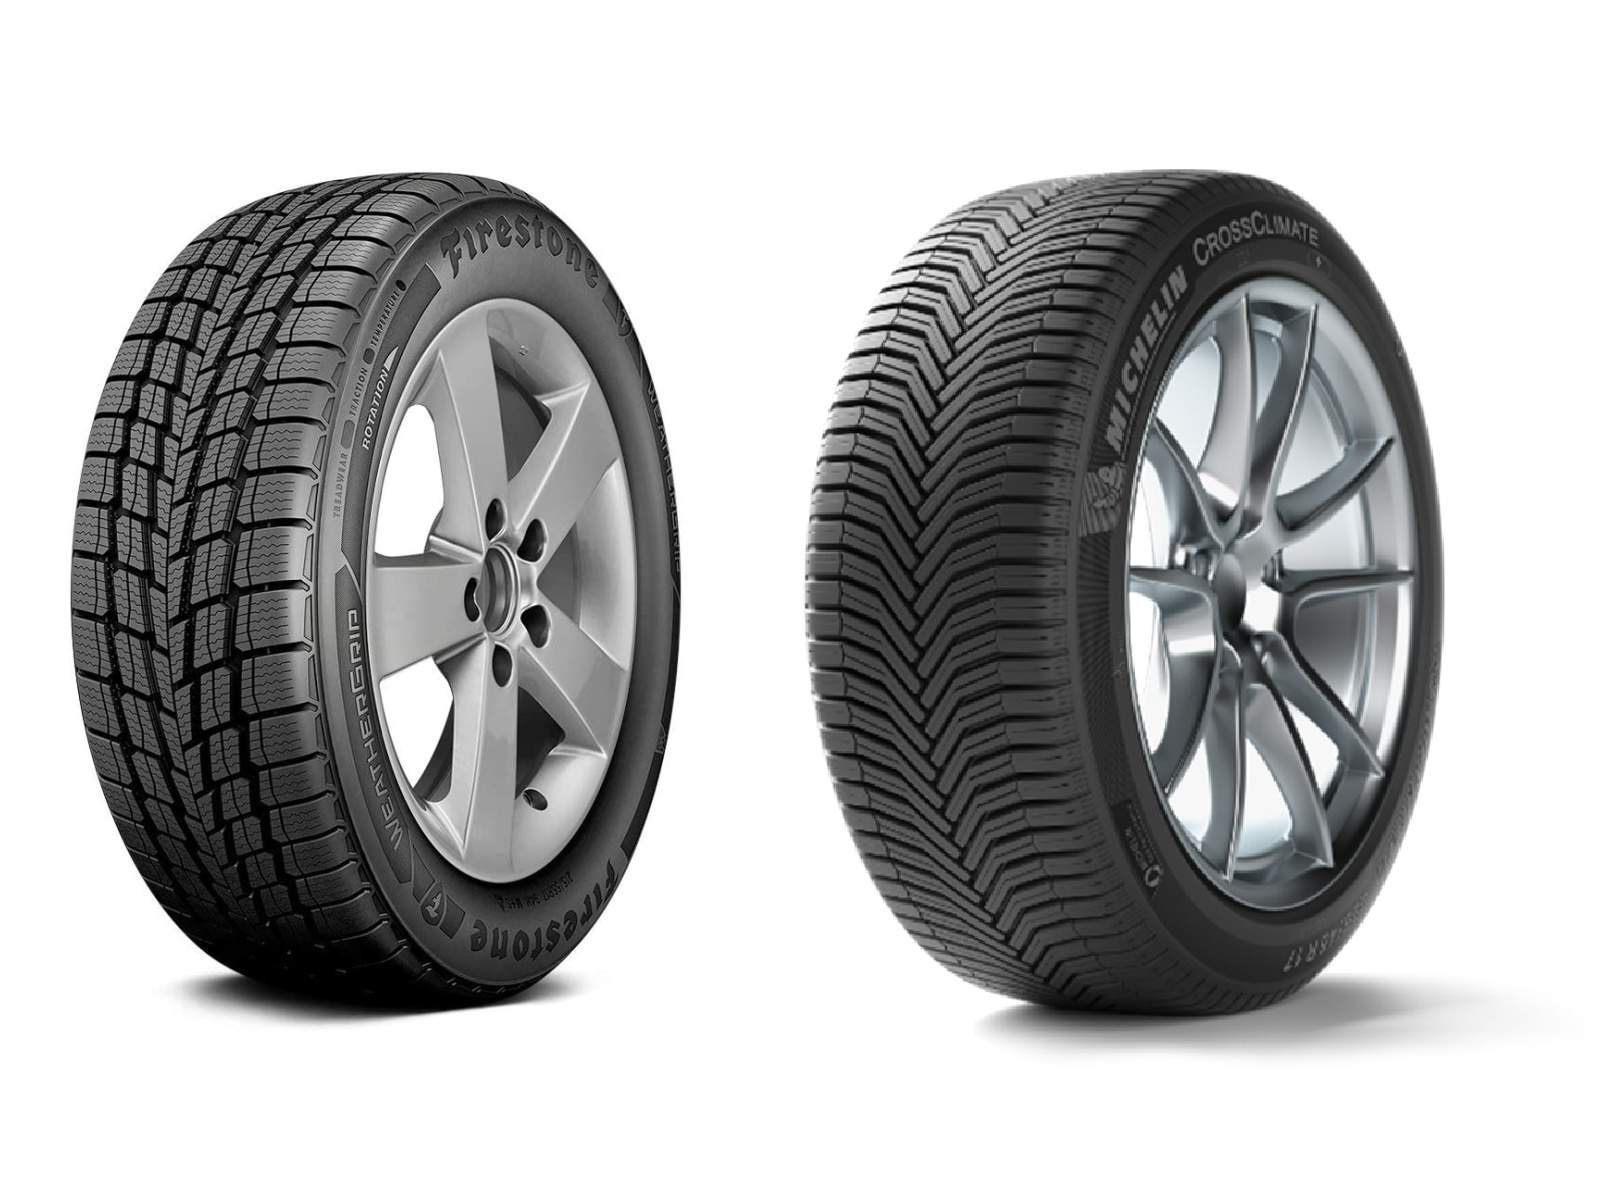 firestone-weathergrip-vs-michelin-crossclimate-tire-reviews-and-more